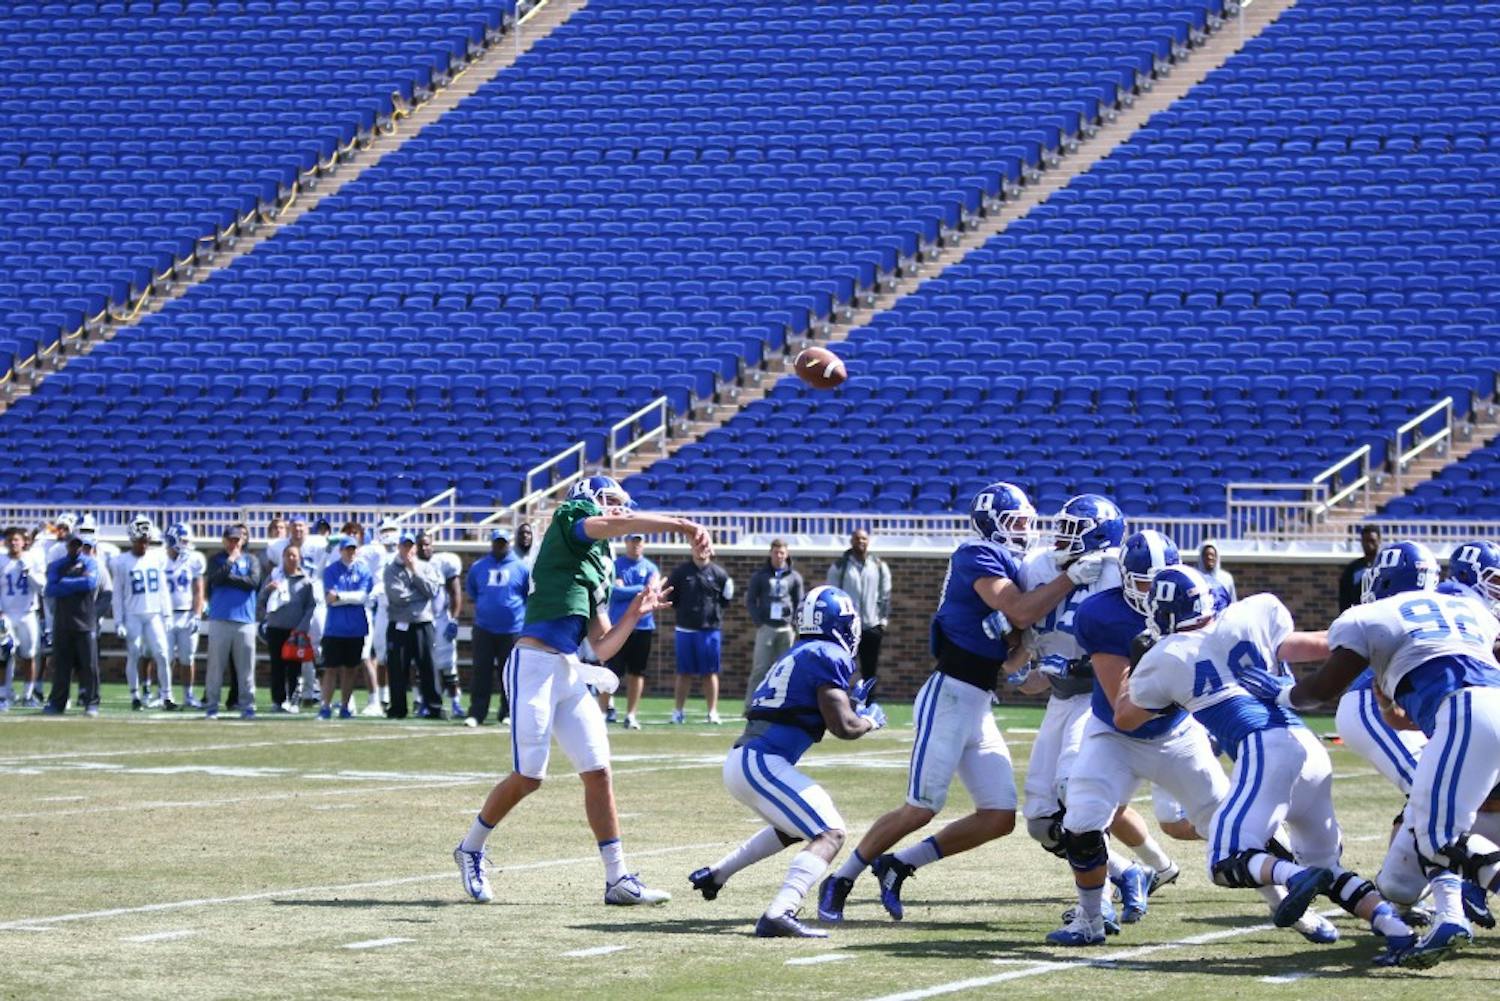 Redshirt freshman quarterback&nbsp;Daniel Jones connected with wide receiver Chris Taylor from eight yards out for a touchdown during&nbsp;Saturday's scrimmage.